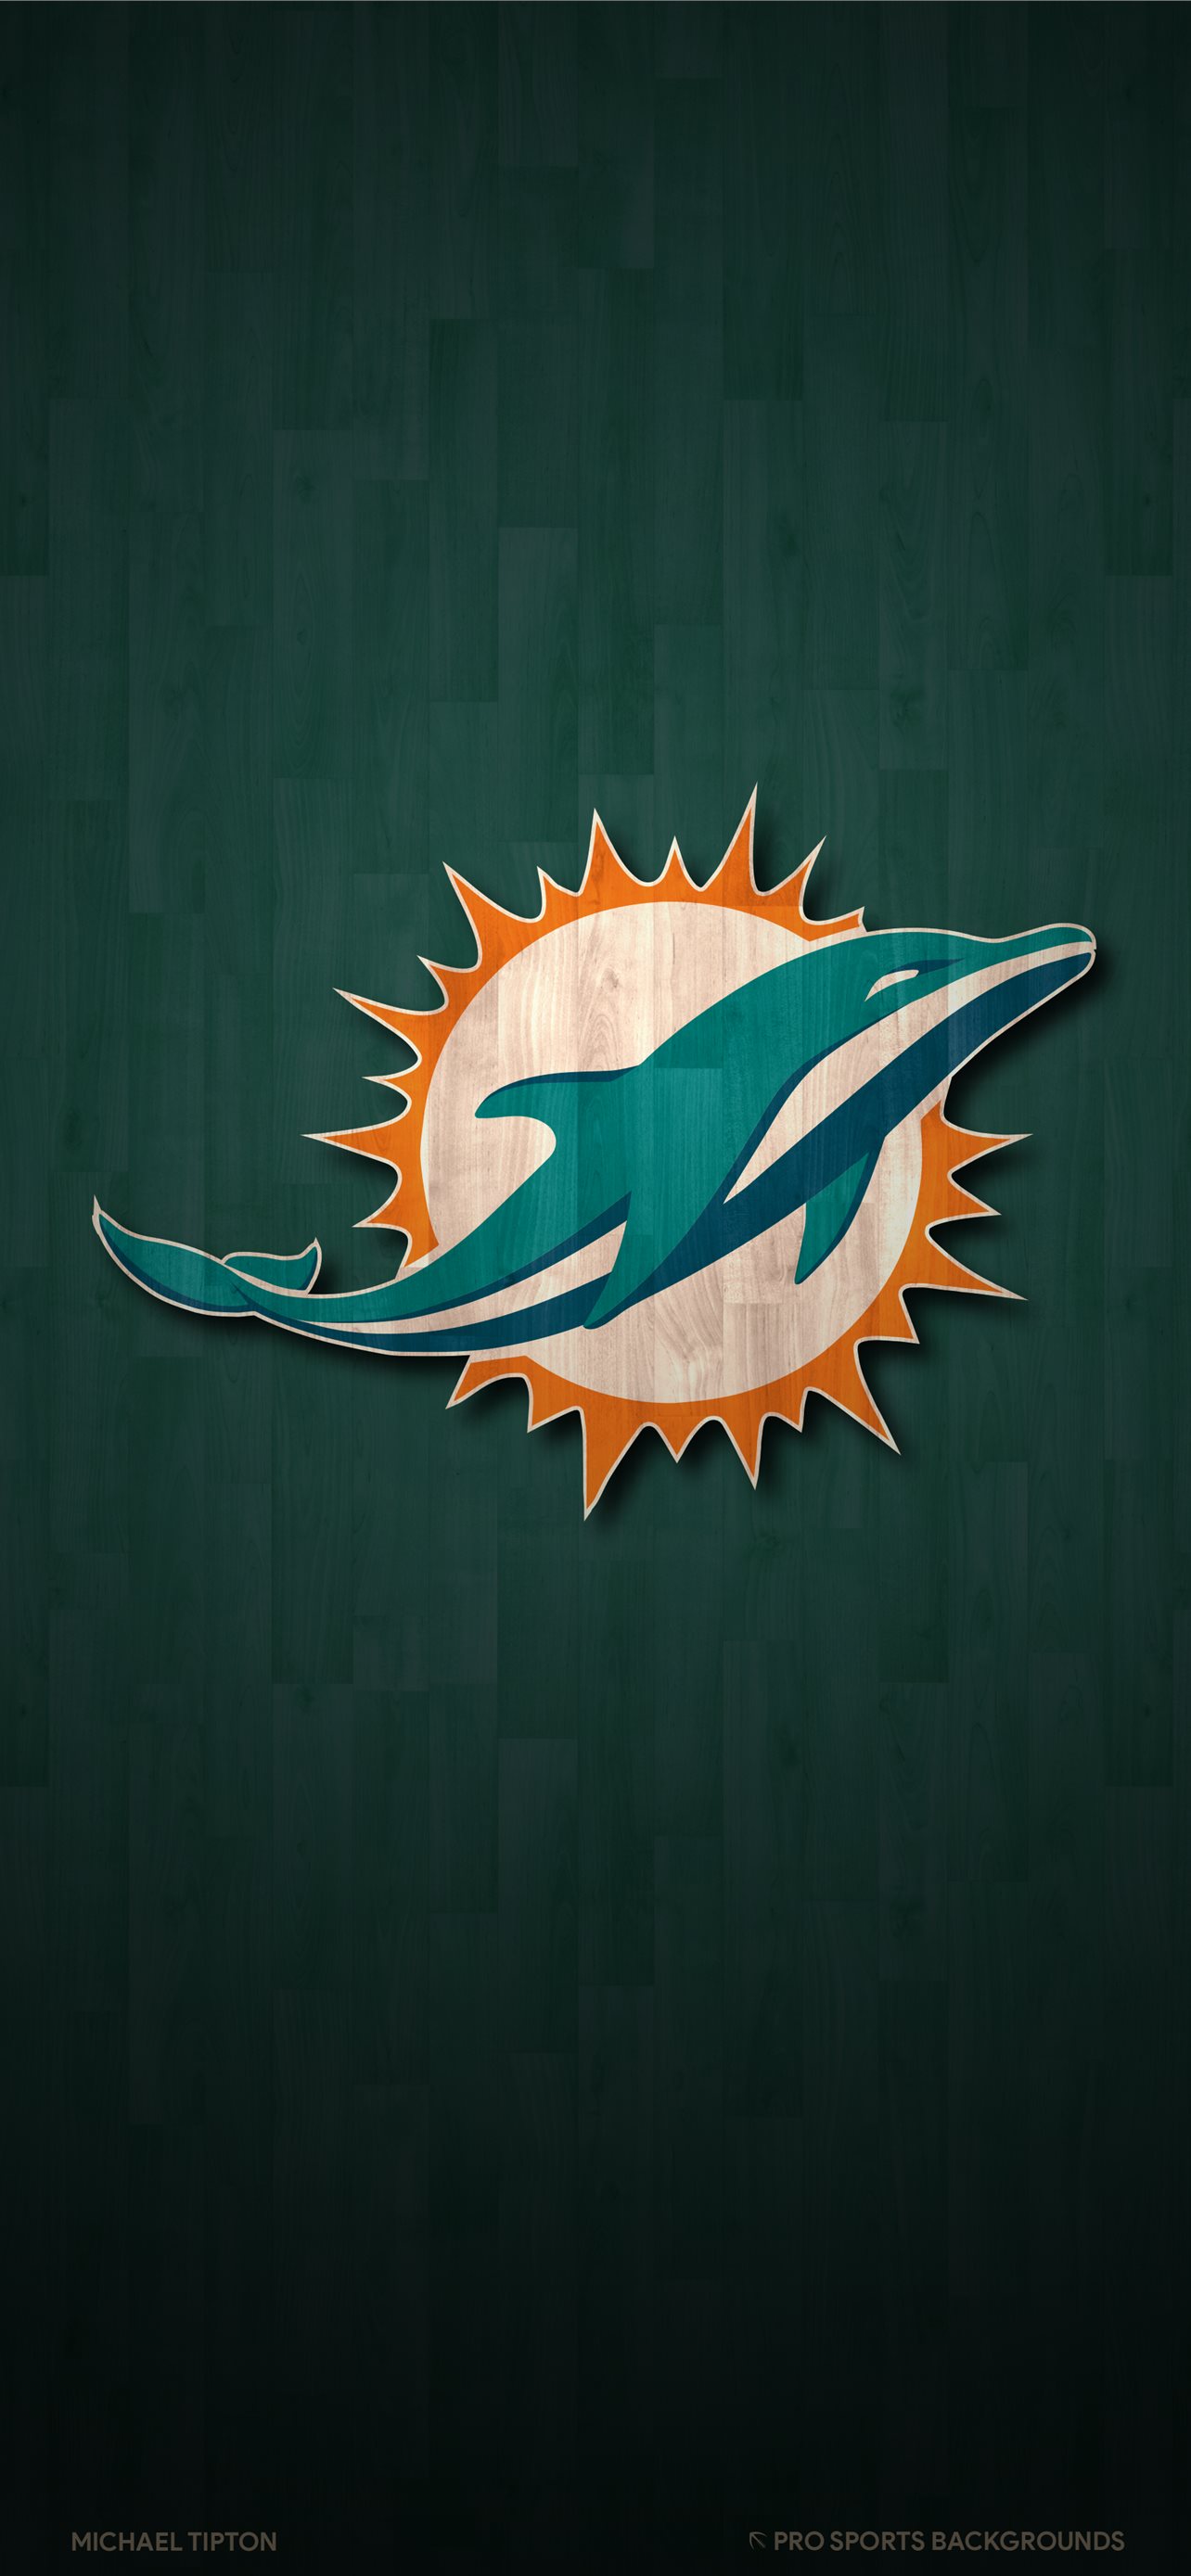 Miami Dolphins Background Wallpaper (76+ images)